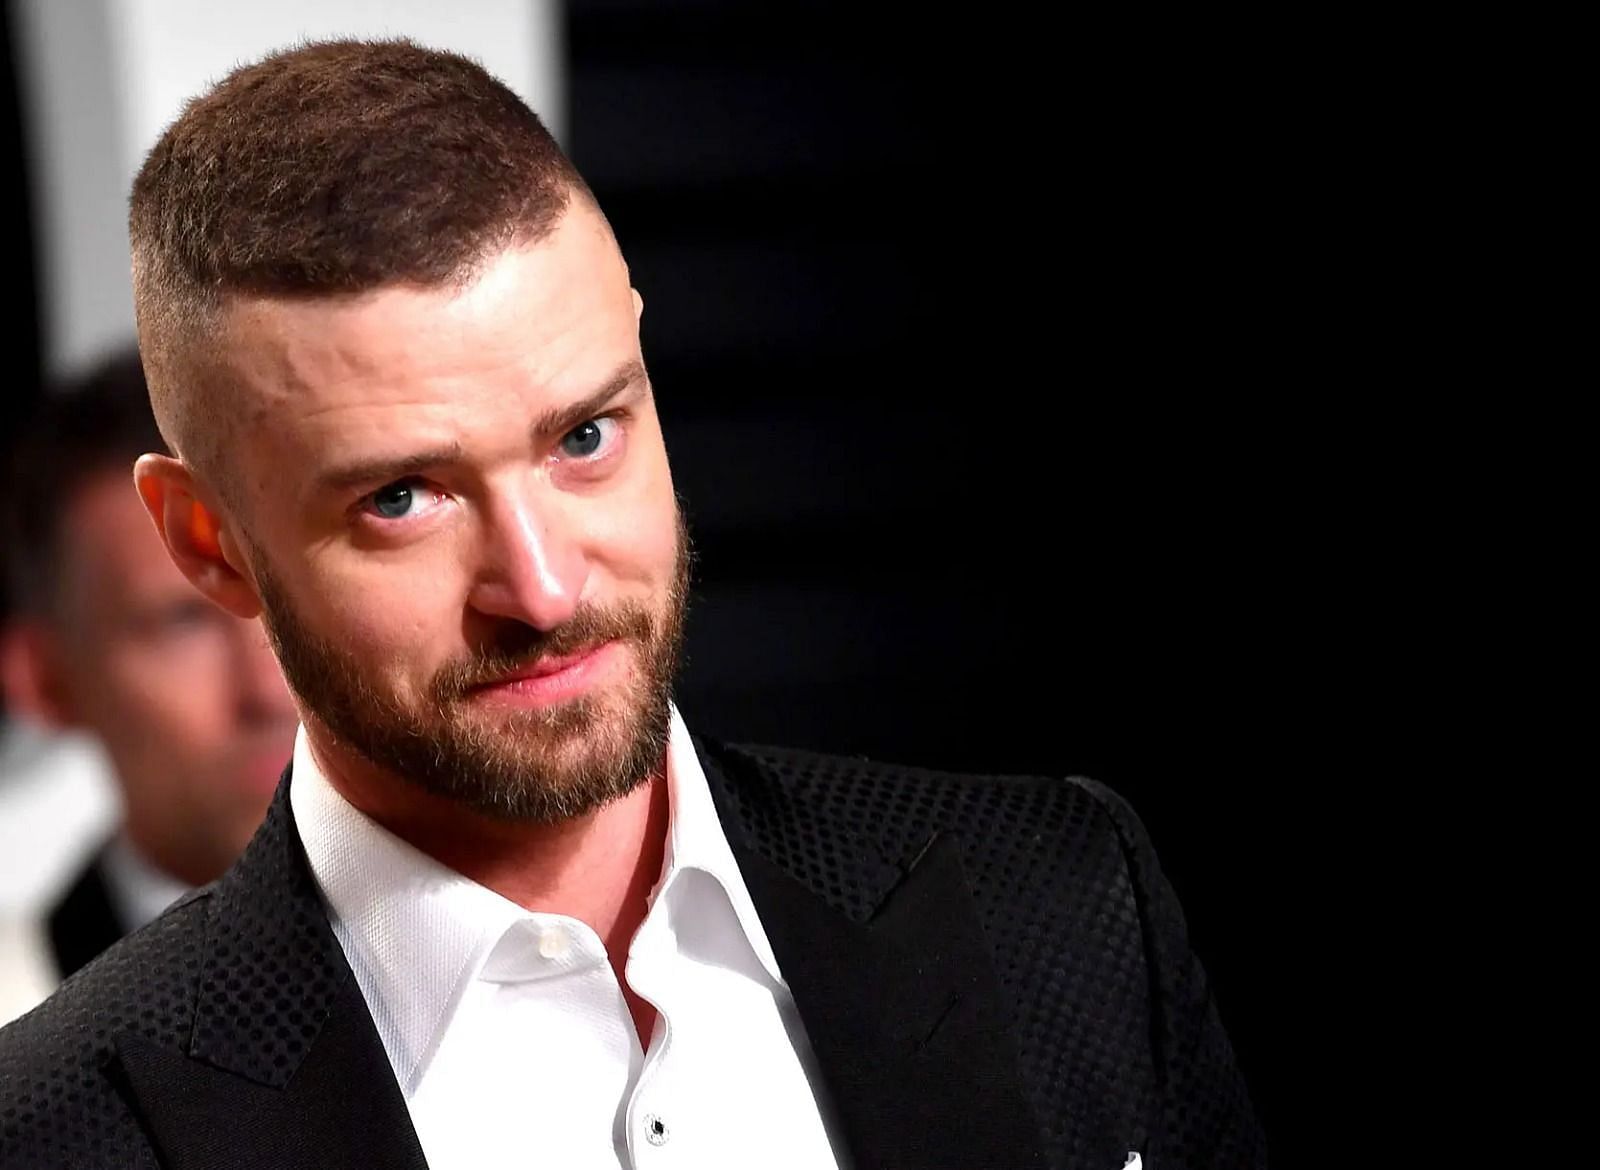 Justin Timberlake in celebrities with cold sores (Image via Getty Images)